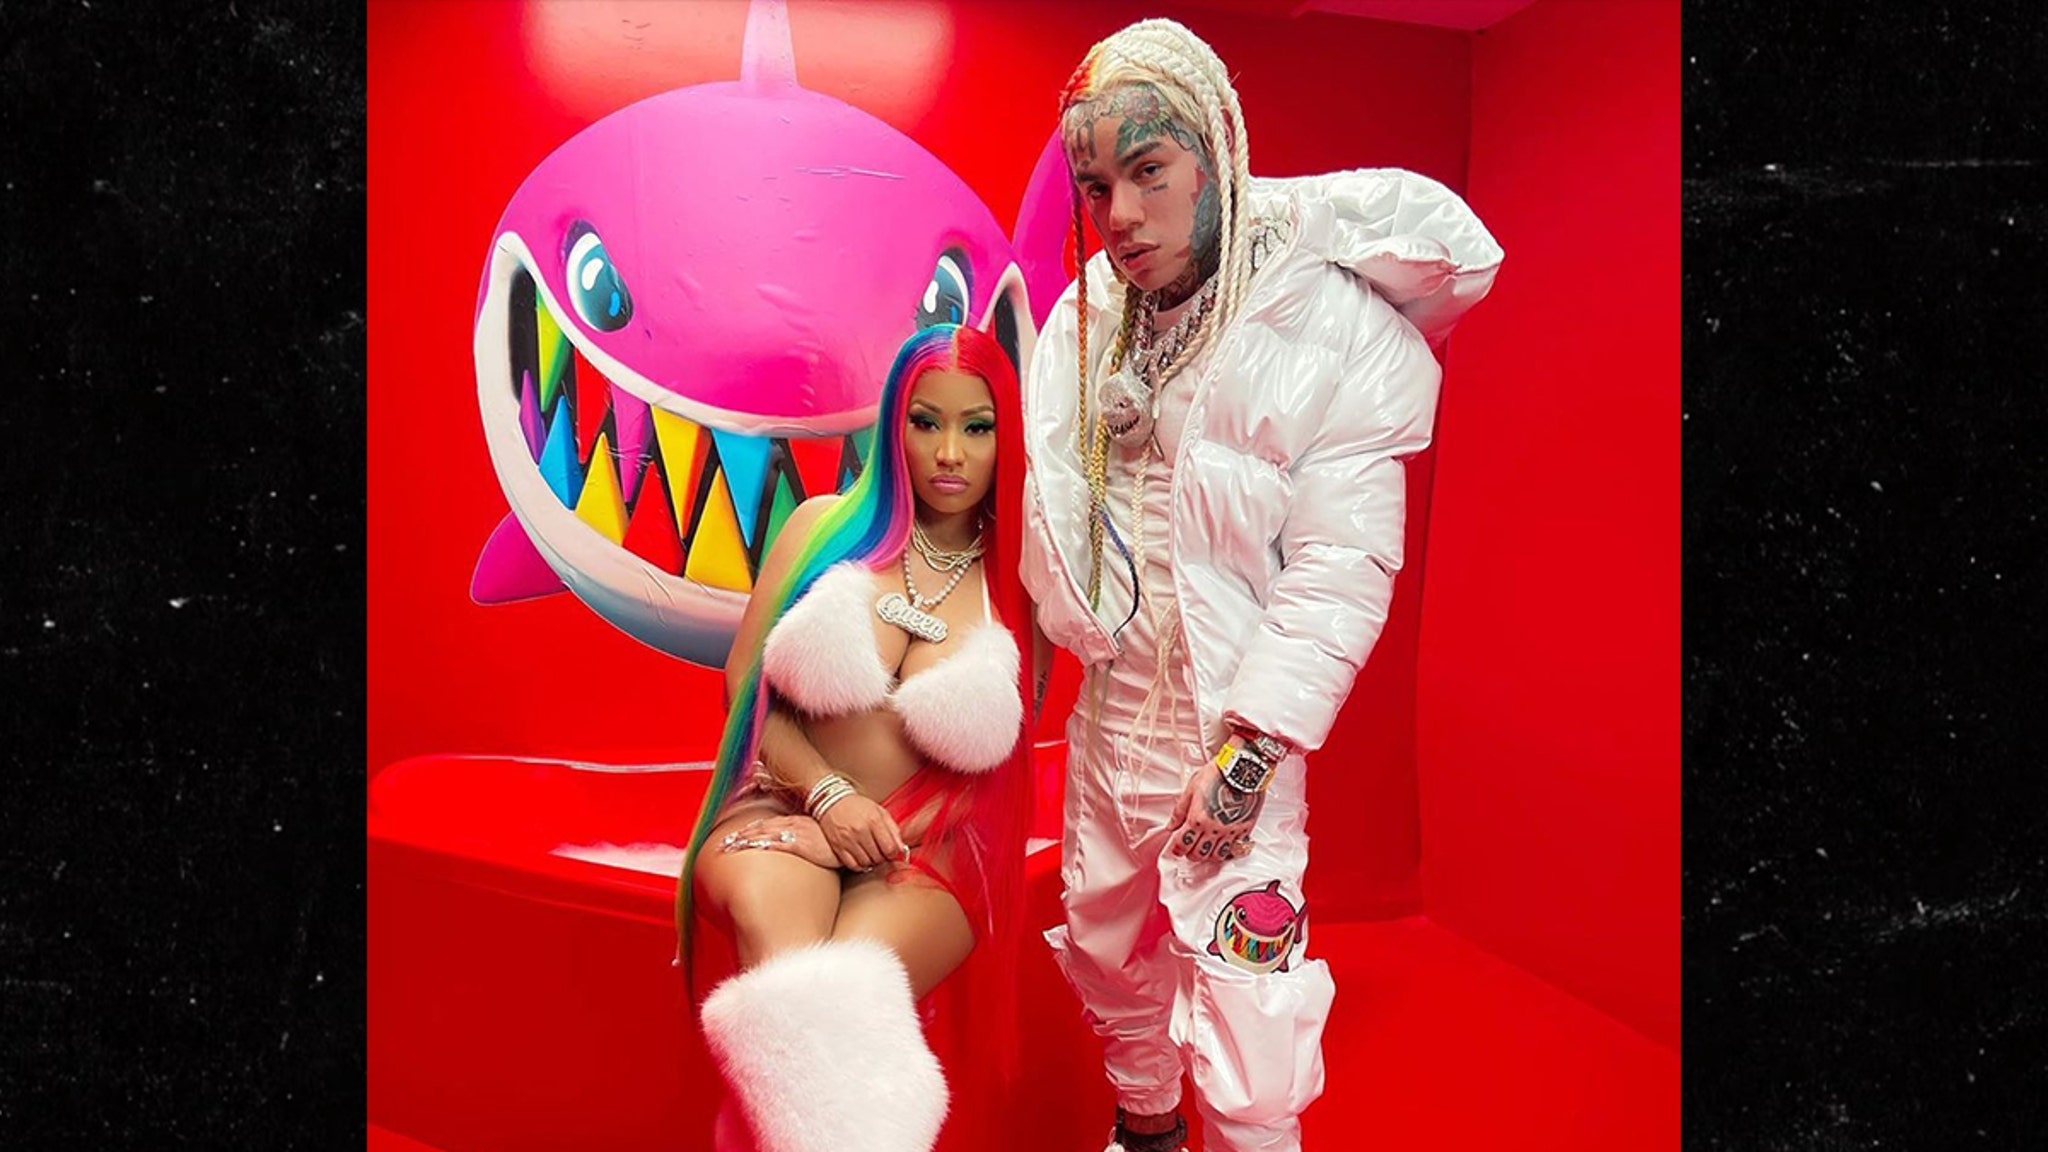 69 Is Back With The Booty??!! 6ix9ine